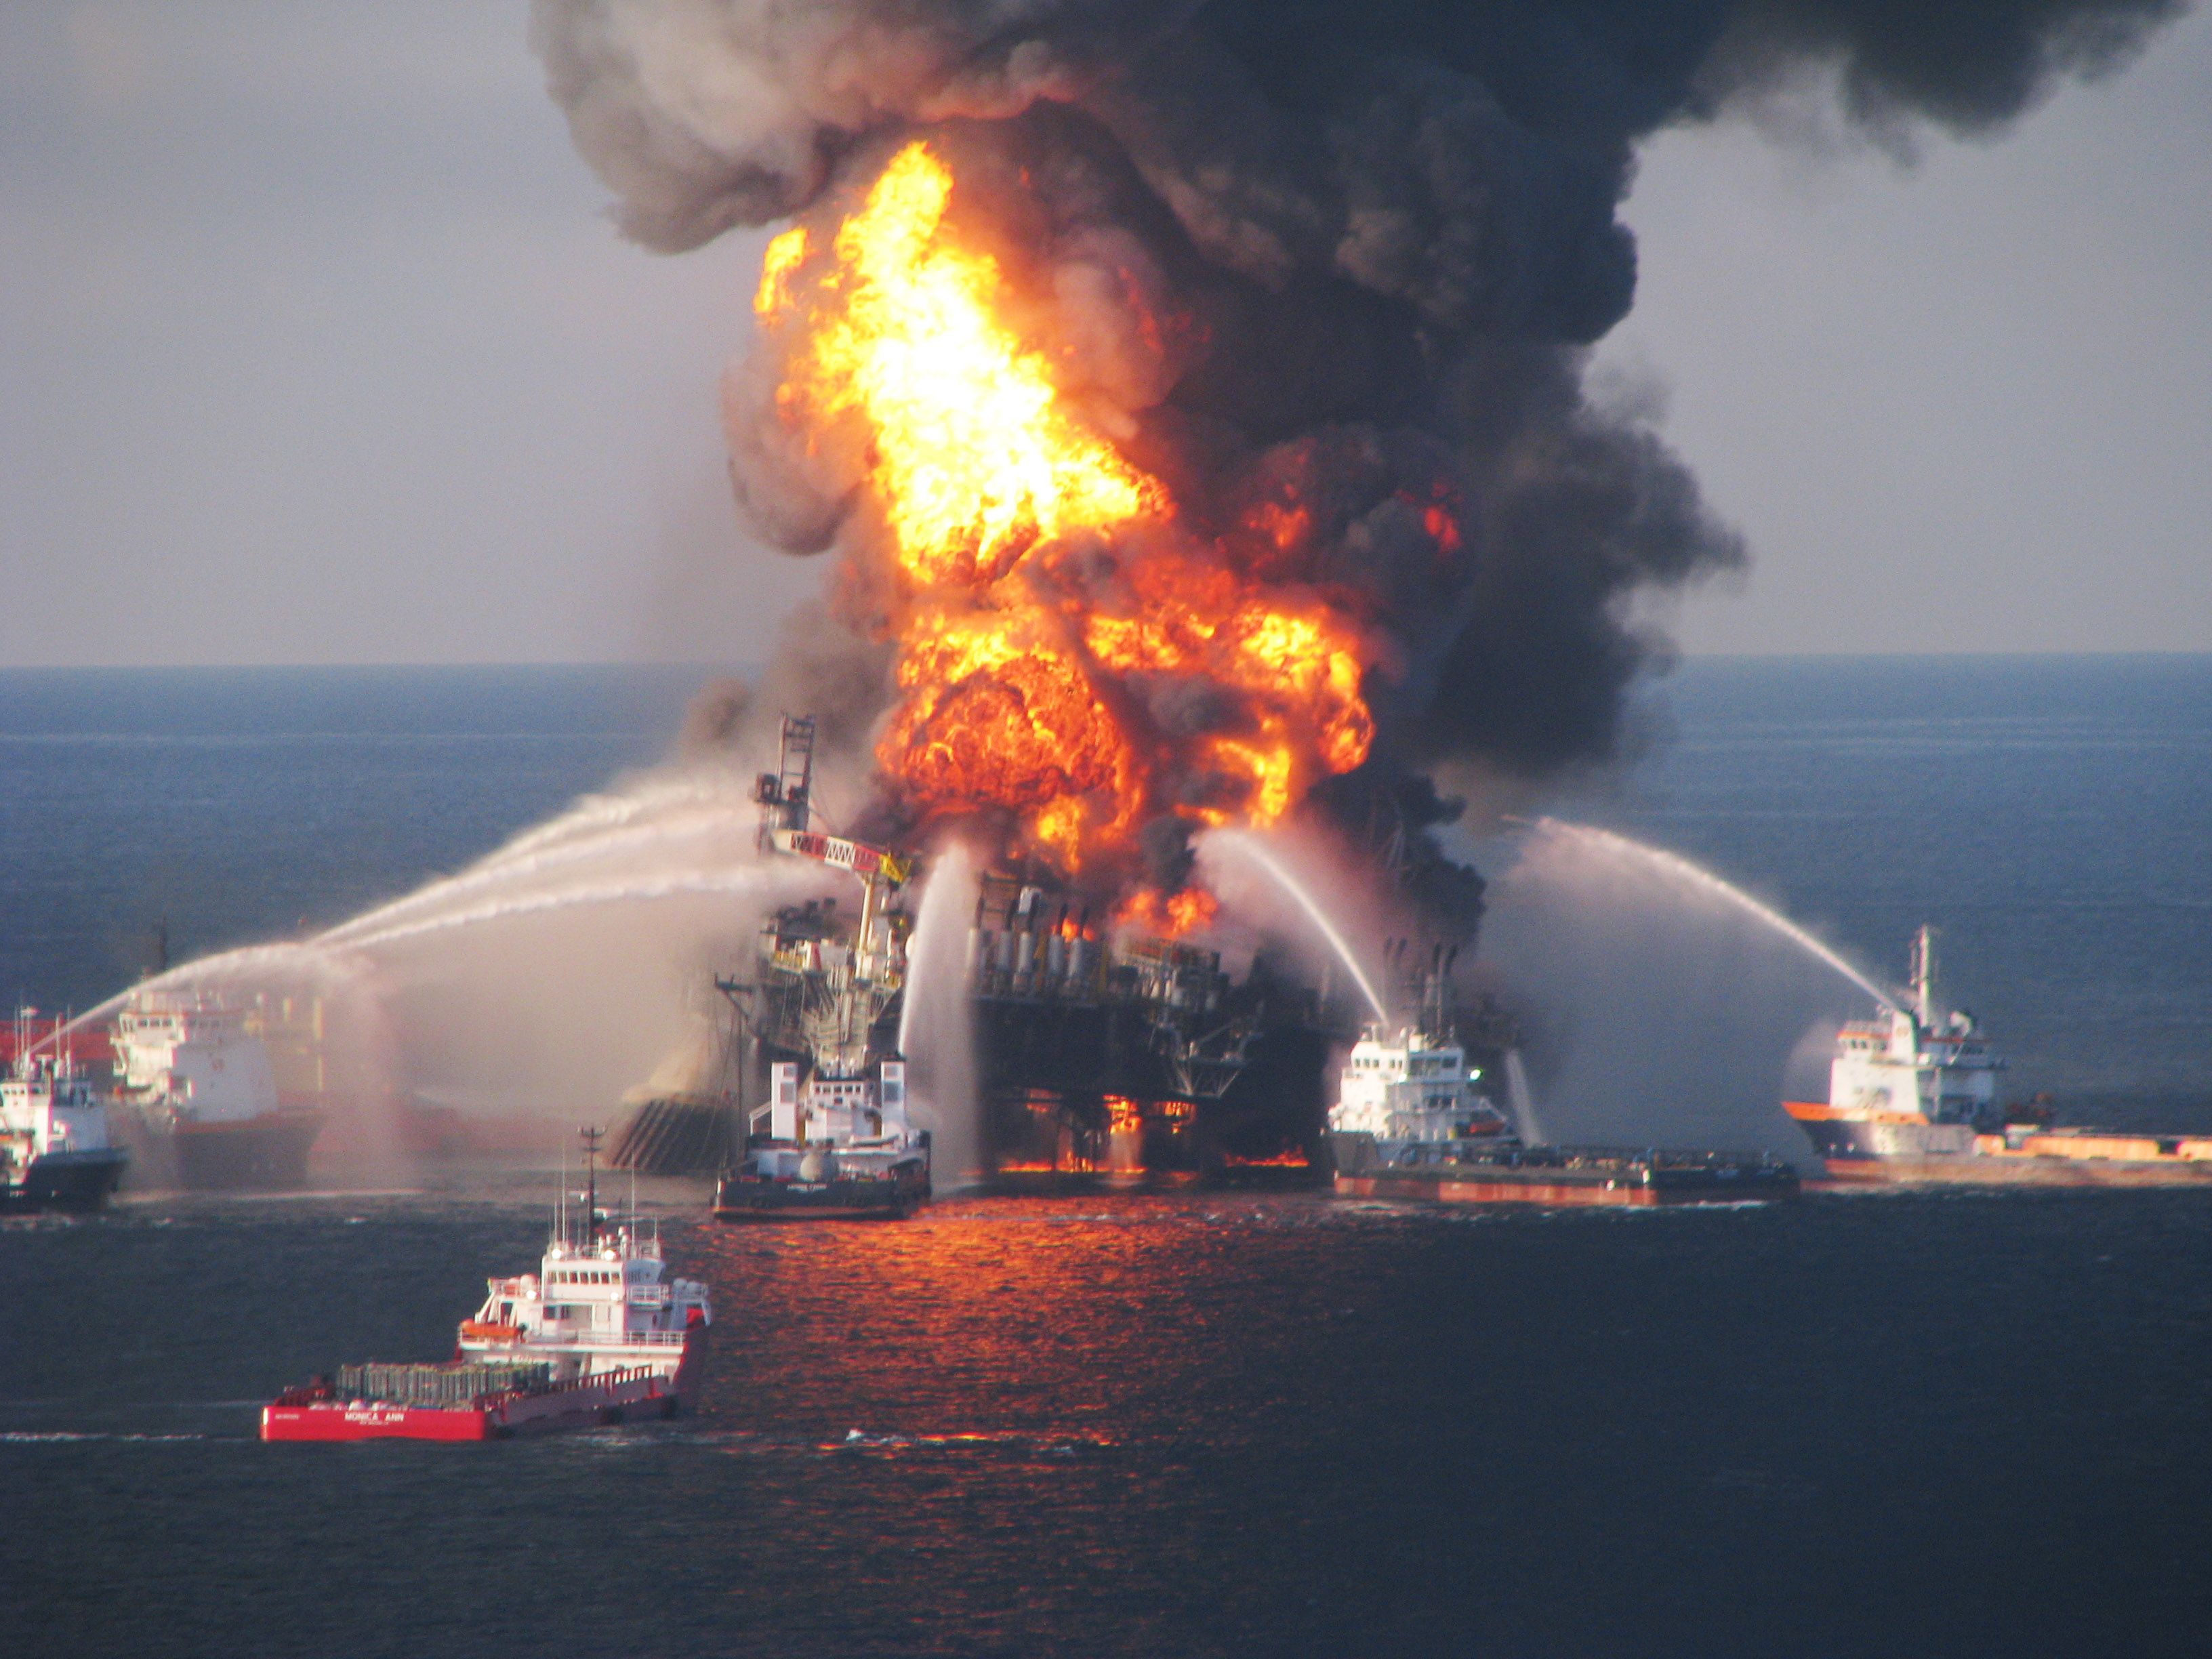 Fire boats battle a fire at the off shore oil rig Deepwater Horizon April 21, 2010 in the Gulf of Mexico off the coast of Louisiana. 